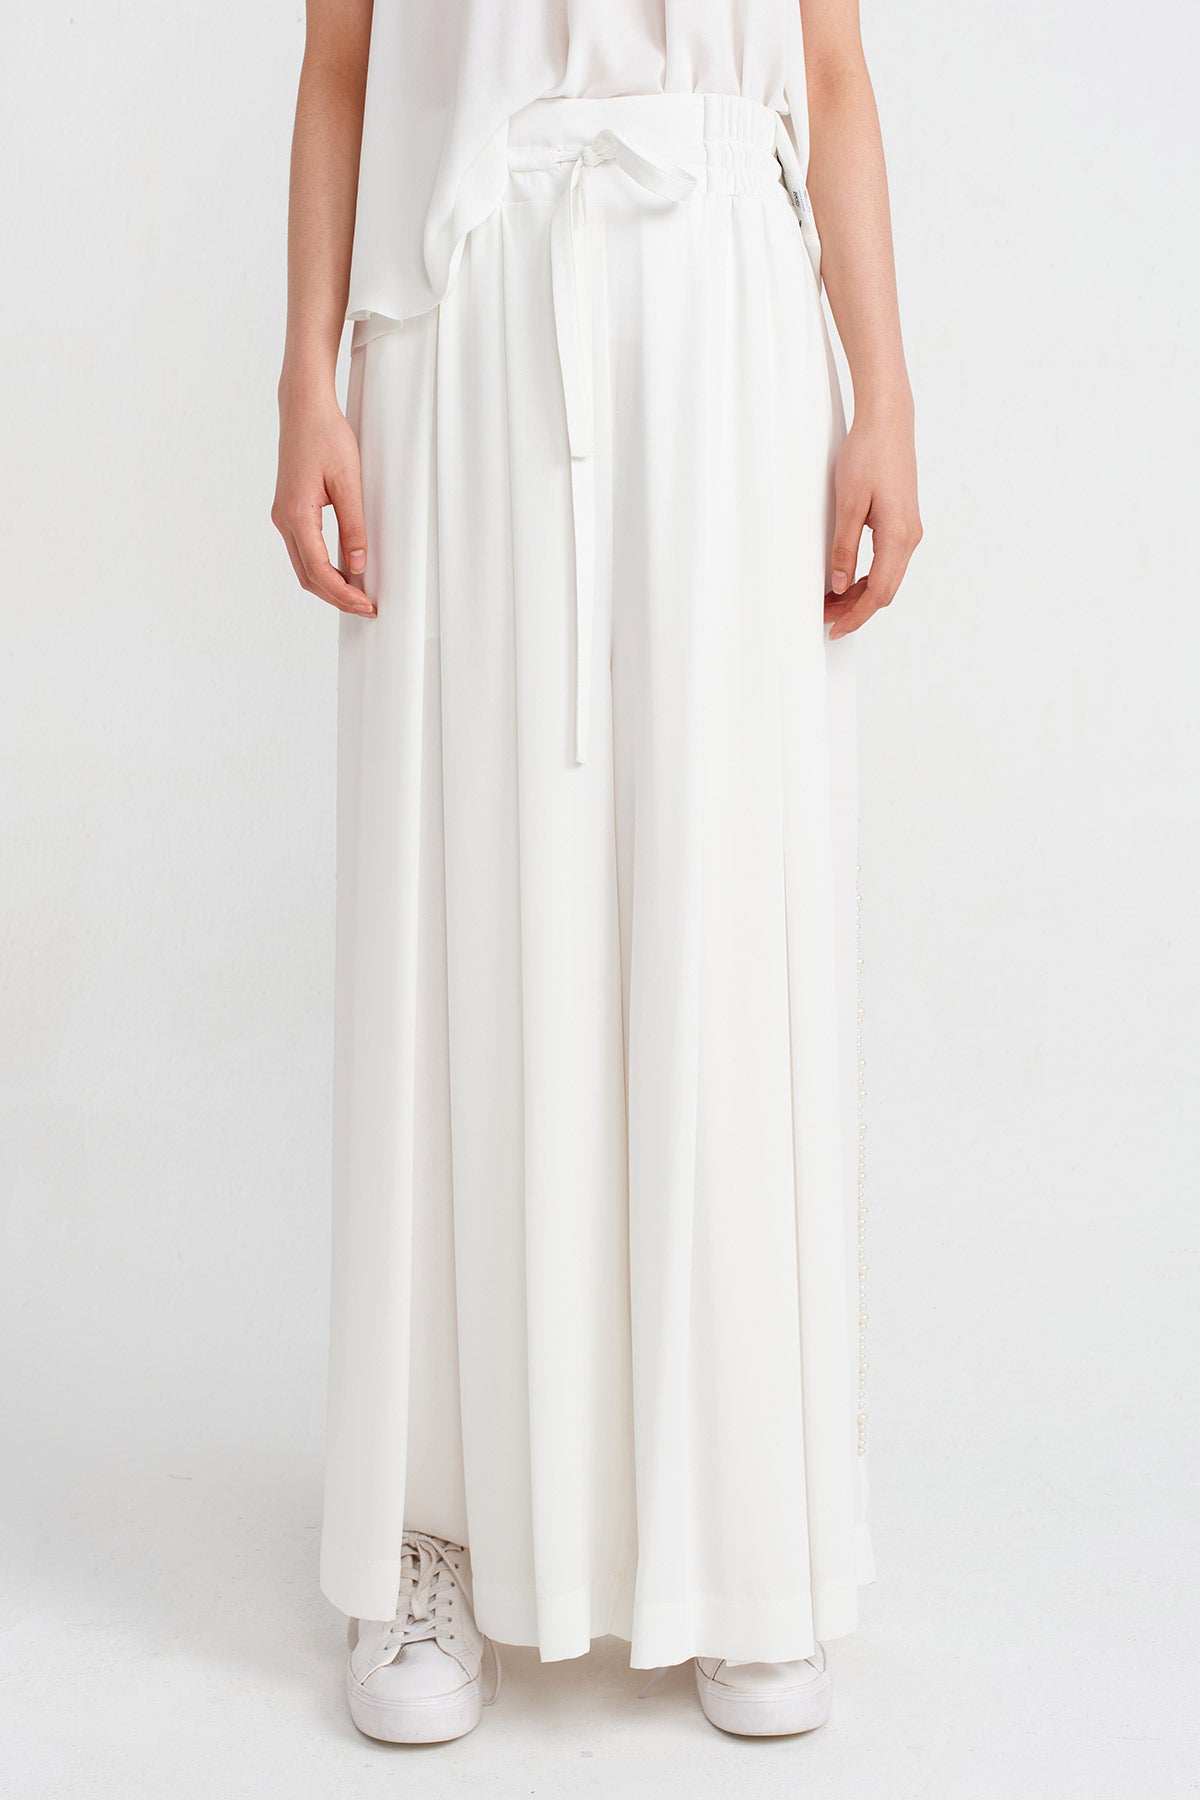 Off White Palazzo Pants with Bead Detailing on the Sides-Y243013070